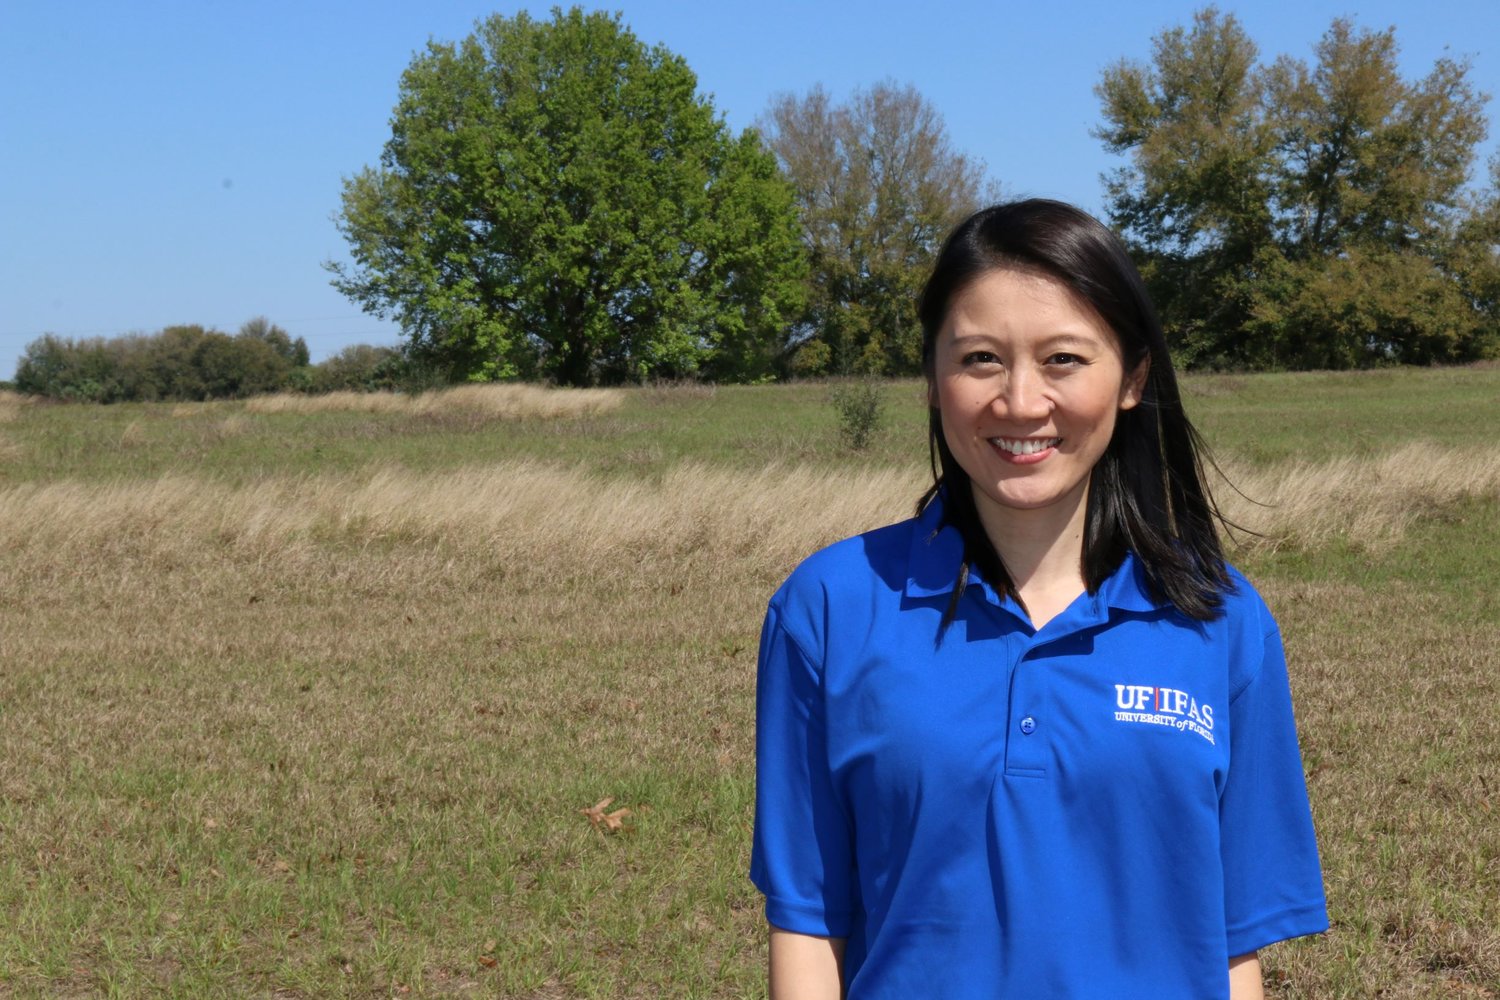 Yilin Zhuang joins the UF/IFAS Extension central district as a Regional Specialized Agent (RSA) in water resources.